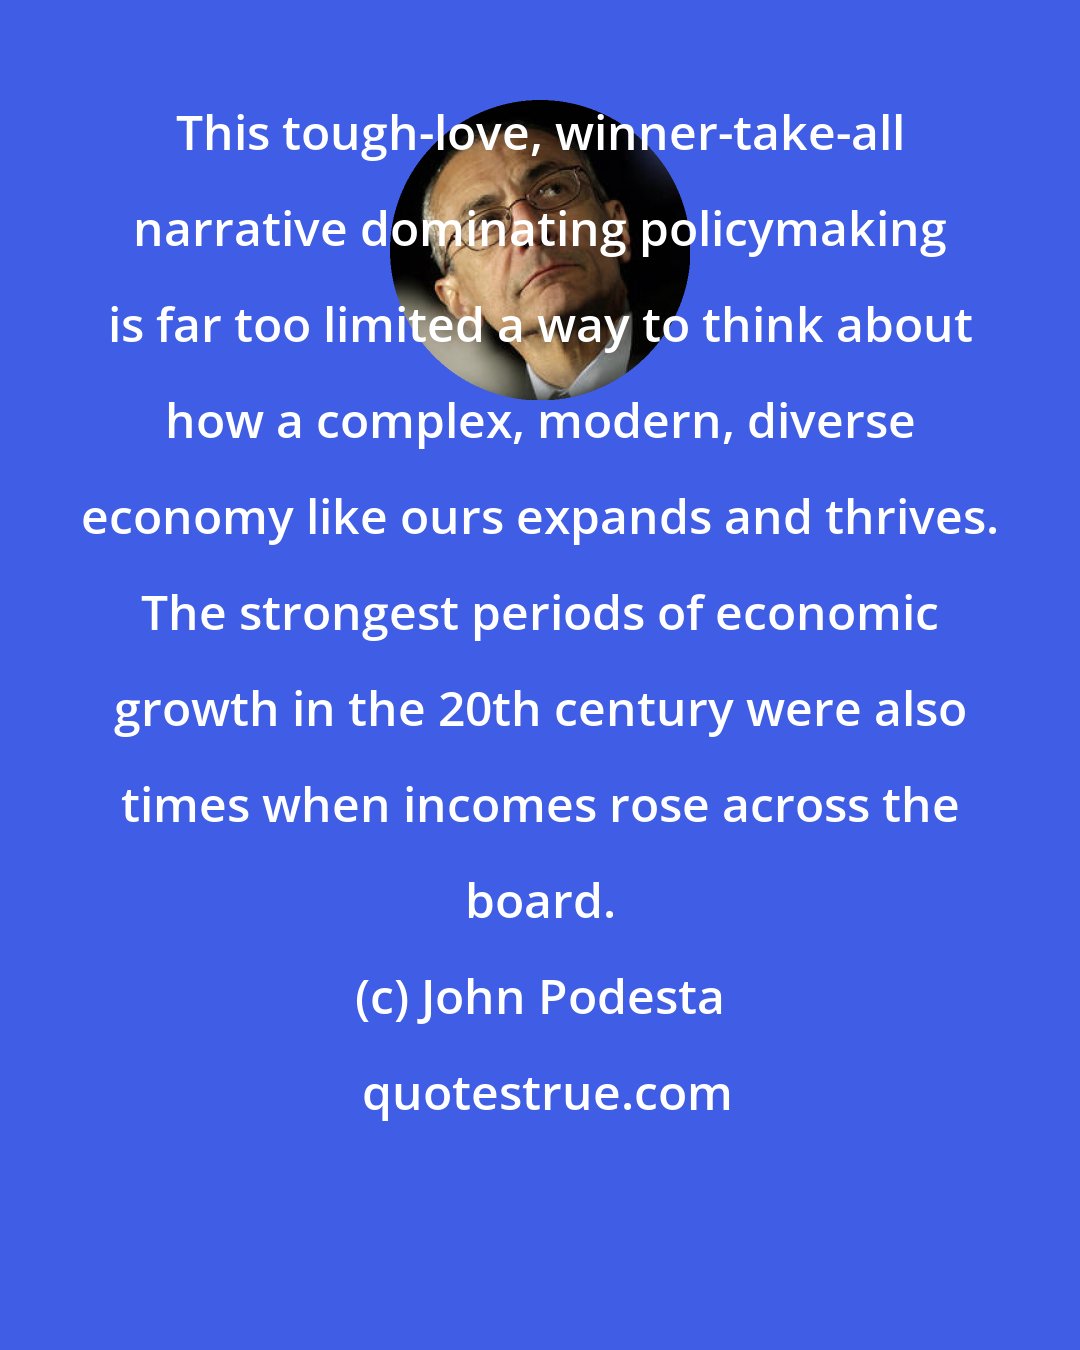 John Podesta: This tough-love, winner-take-all narrative dominating policymaking is far too limited a way to think about how a complex, modern, diverse economy like ours expands and thrives. The strongest periods of economic growth in the 20th century were also times when incomes rose across the board.